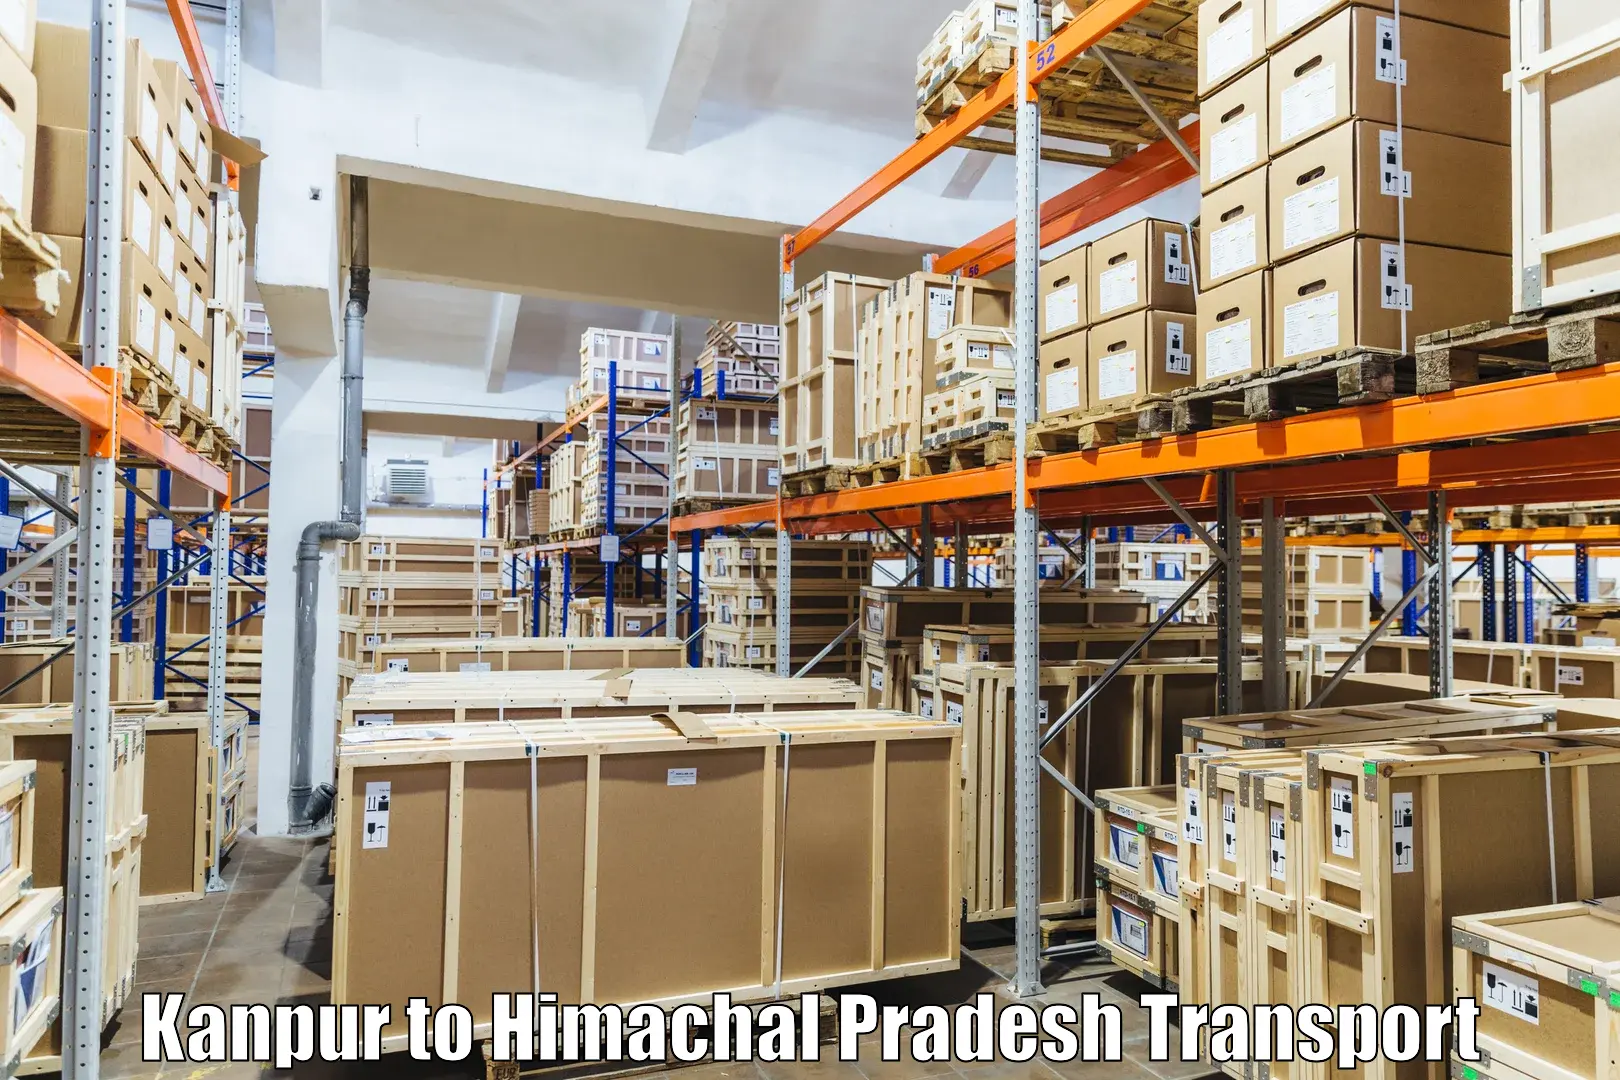 Vehicle transport services in Kanpur to Bharmour